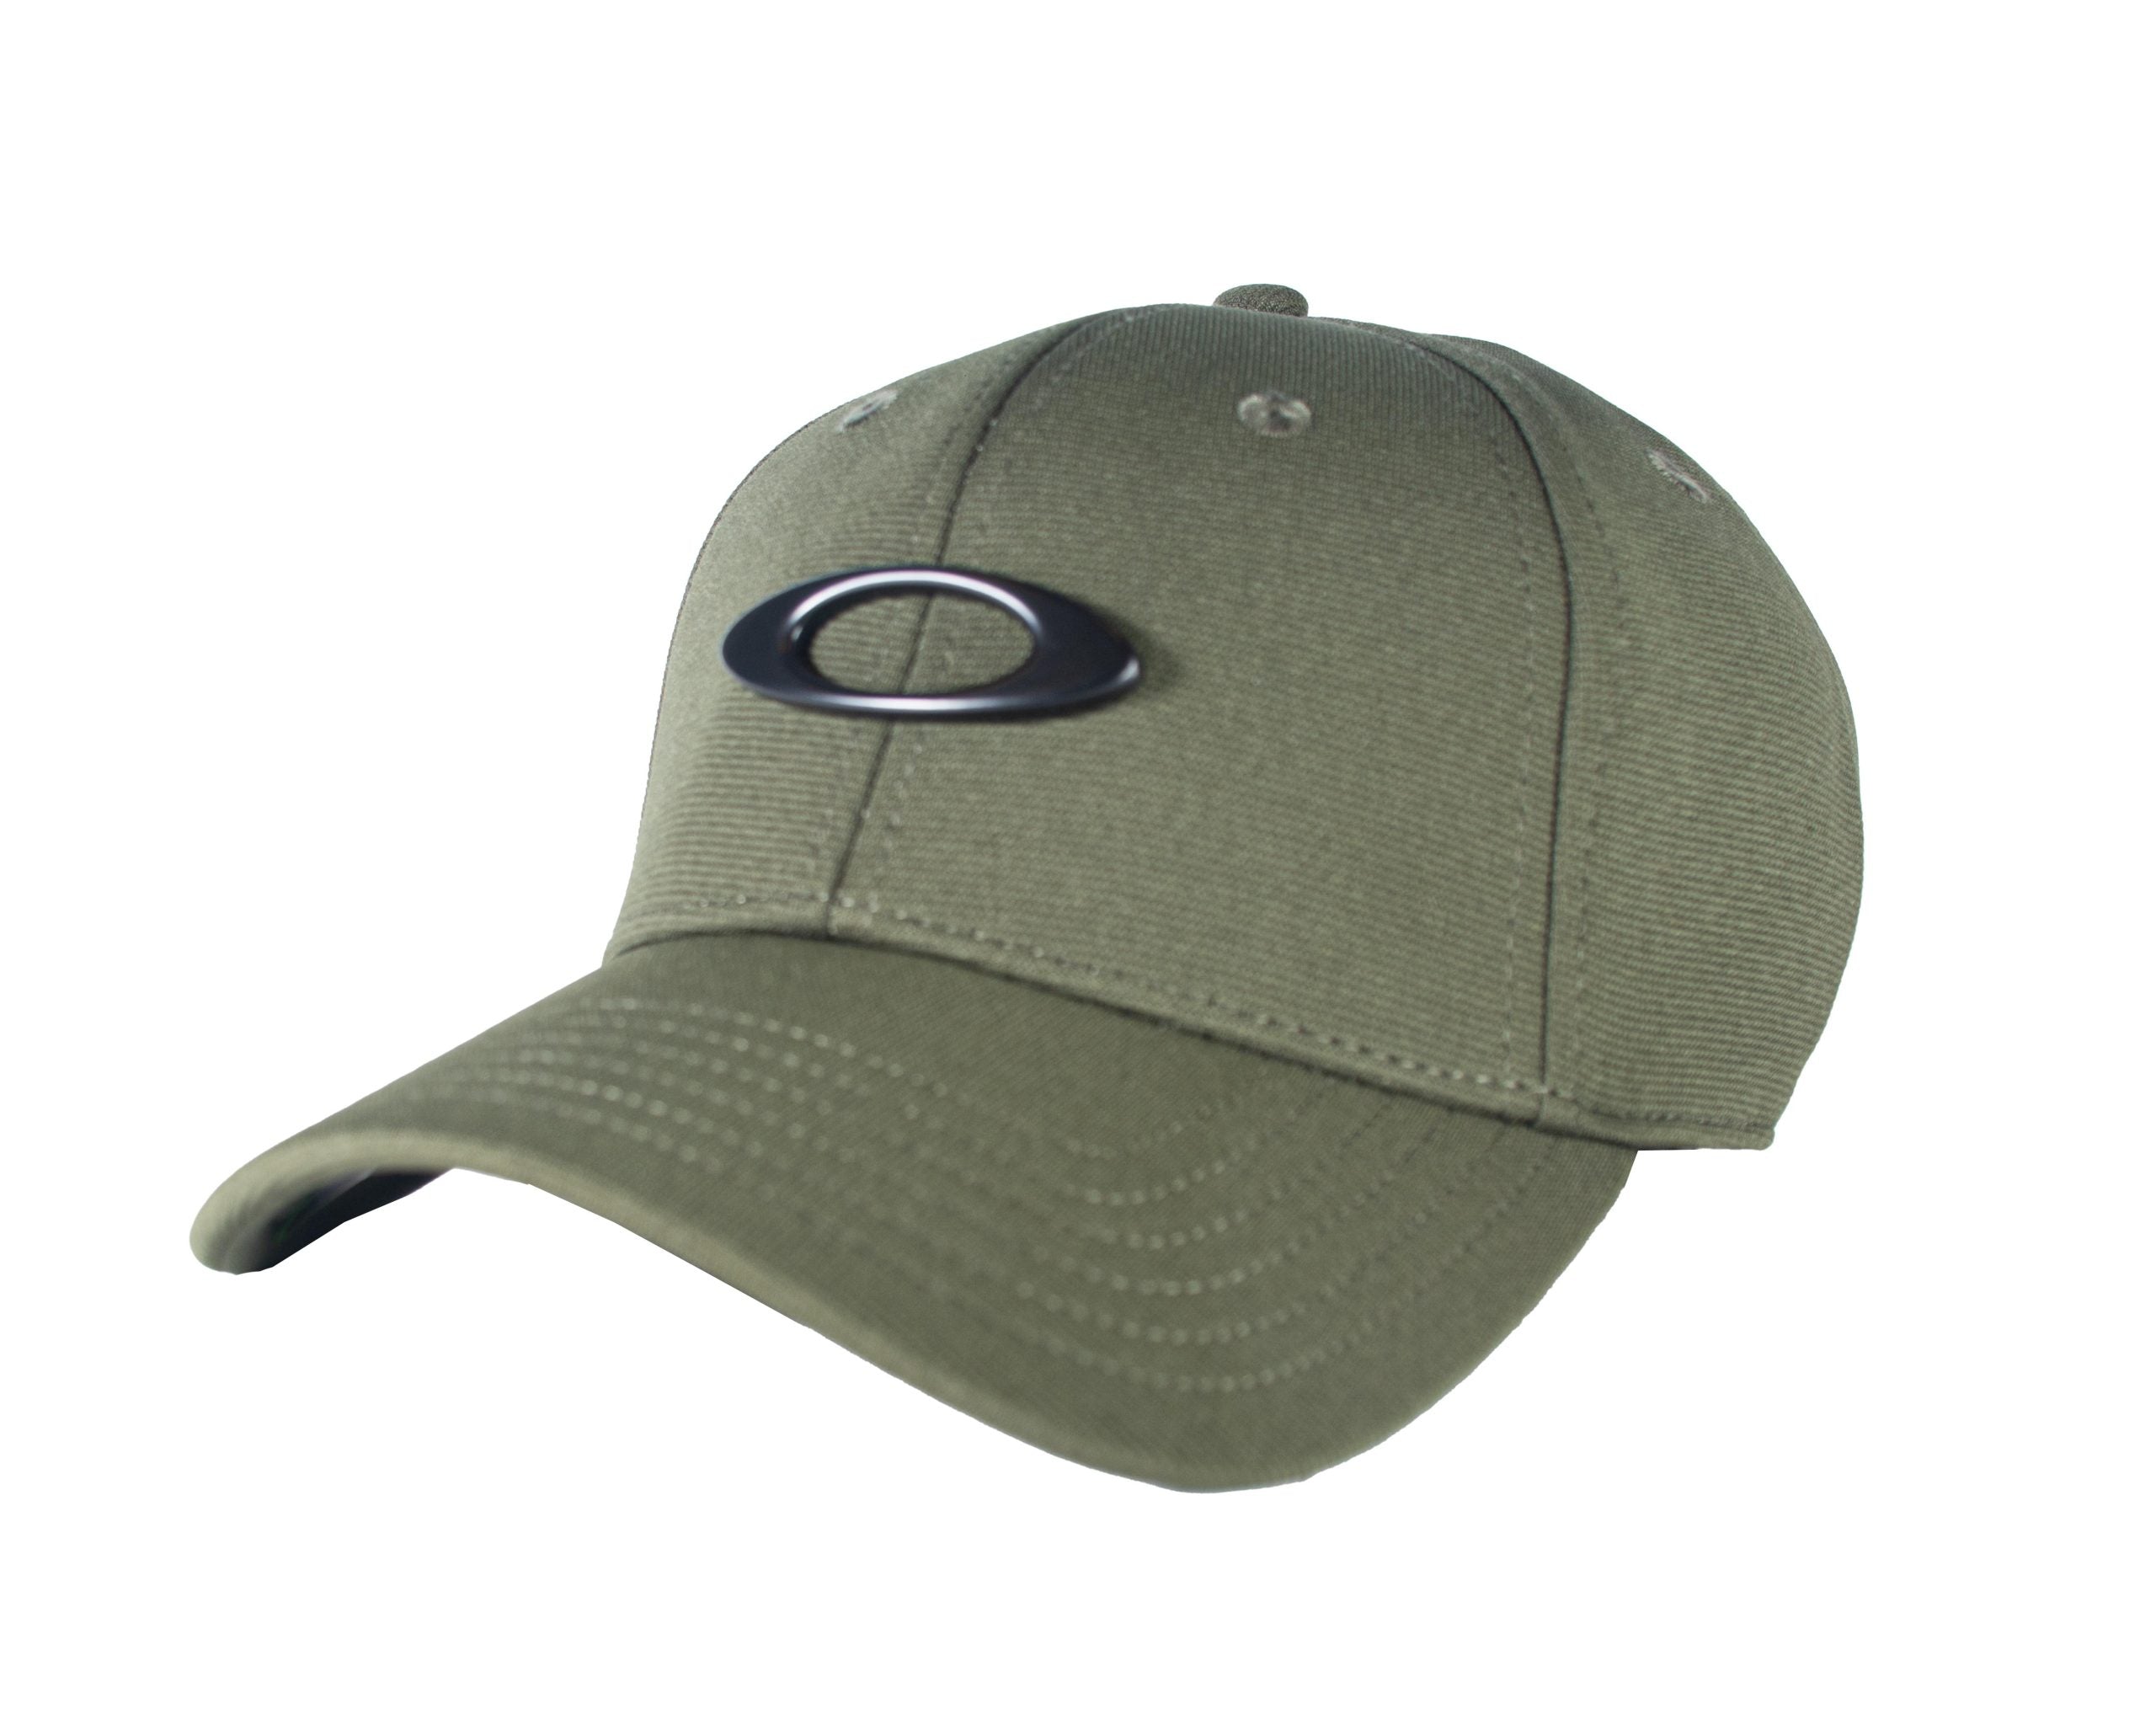 Green cap with front logo